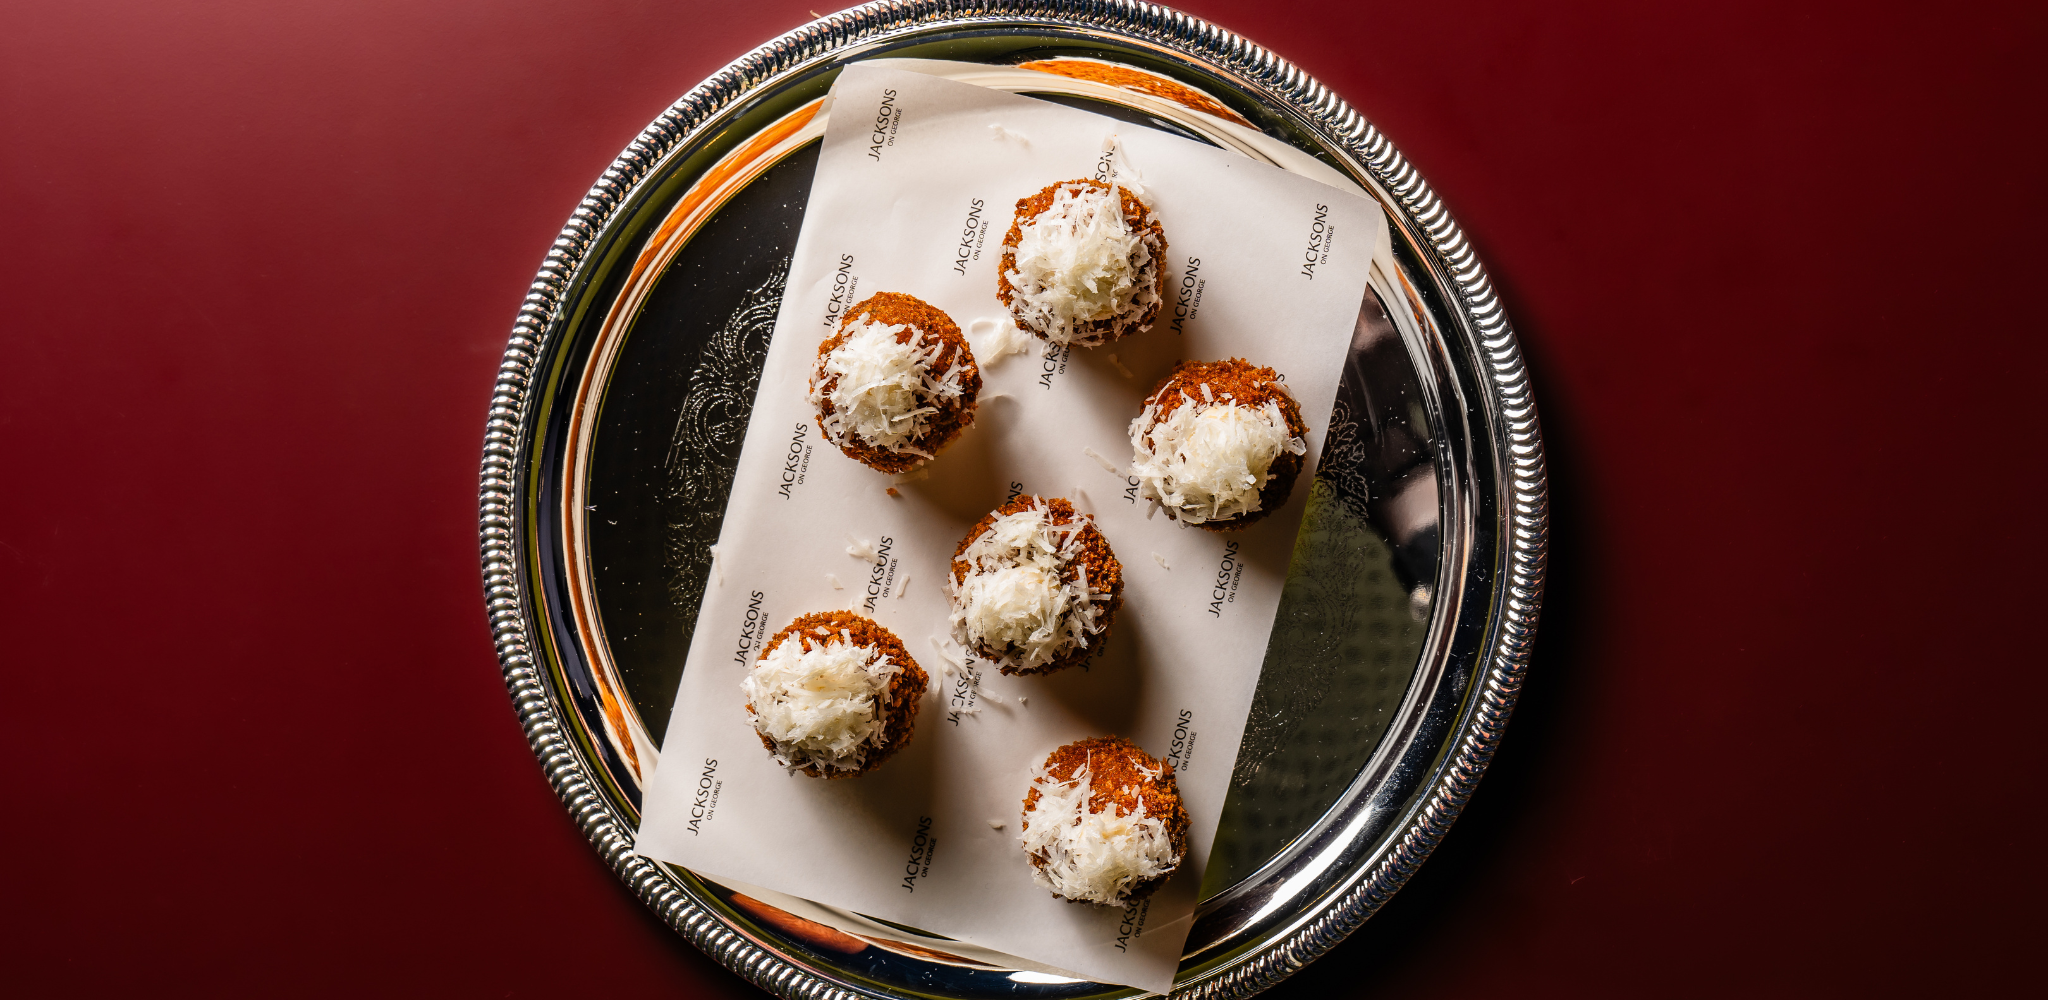 Image of mushroom arancini, parmesan and truffle aioli on a silver platter served at events at Jacksons on George.